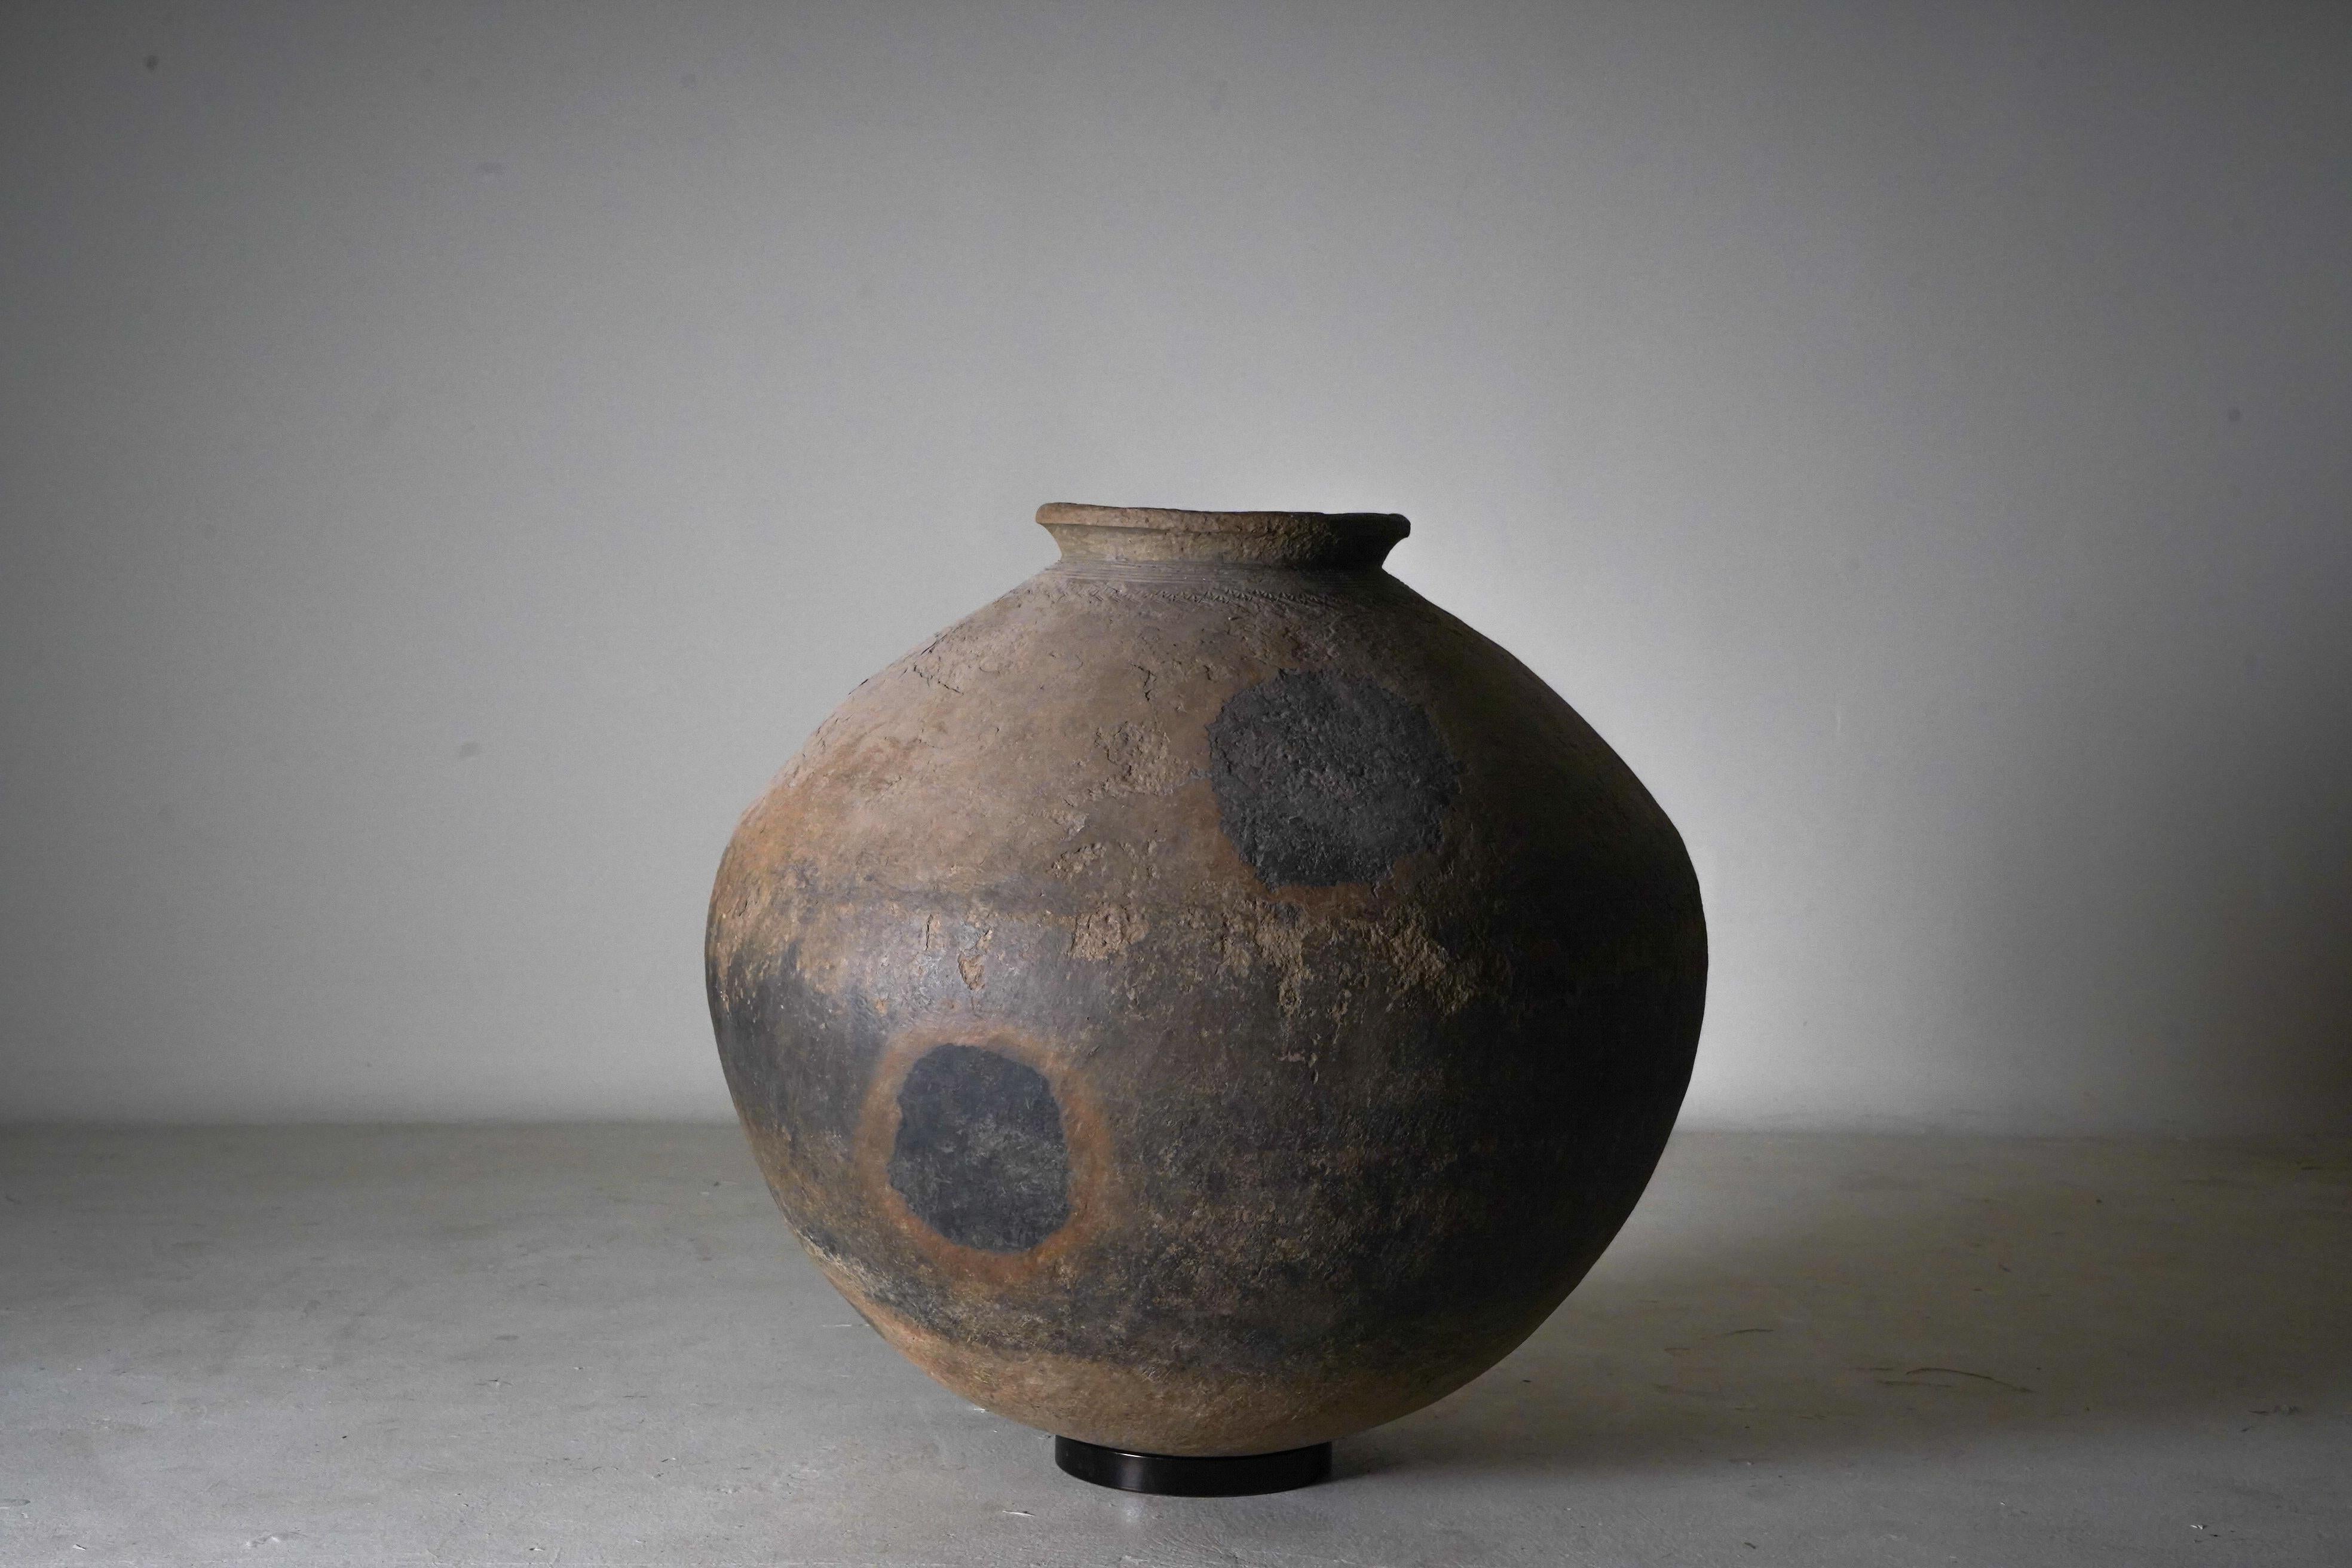 A large and rare terracotta vessel from the Mon people of the Irrawaddy River valley, Burma. These huge vessels were fired in stacked groupings. Where the jars directly touched one another, the grey terra cotta turned black due to lack of oxygen.